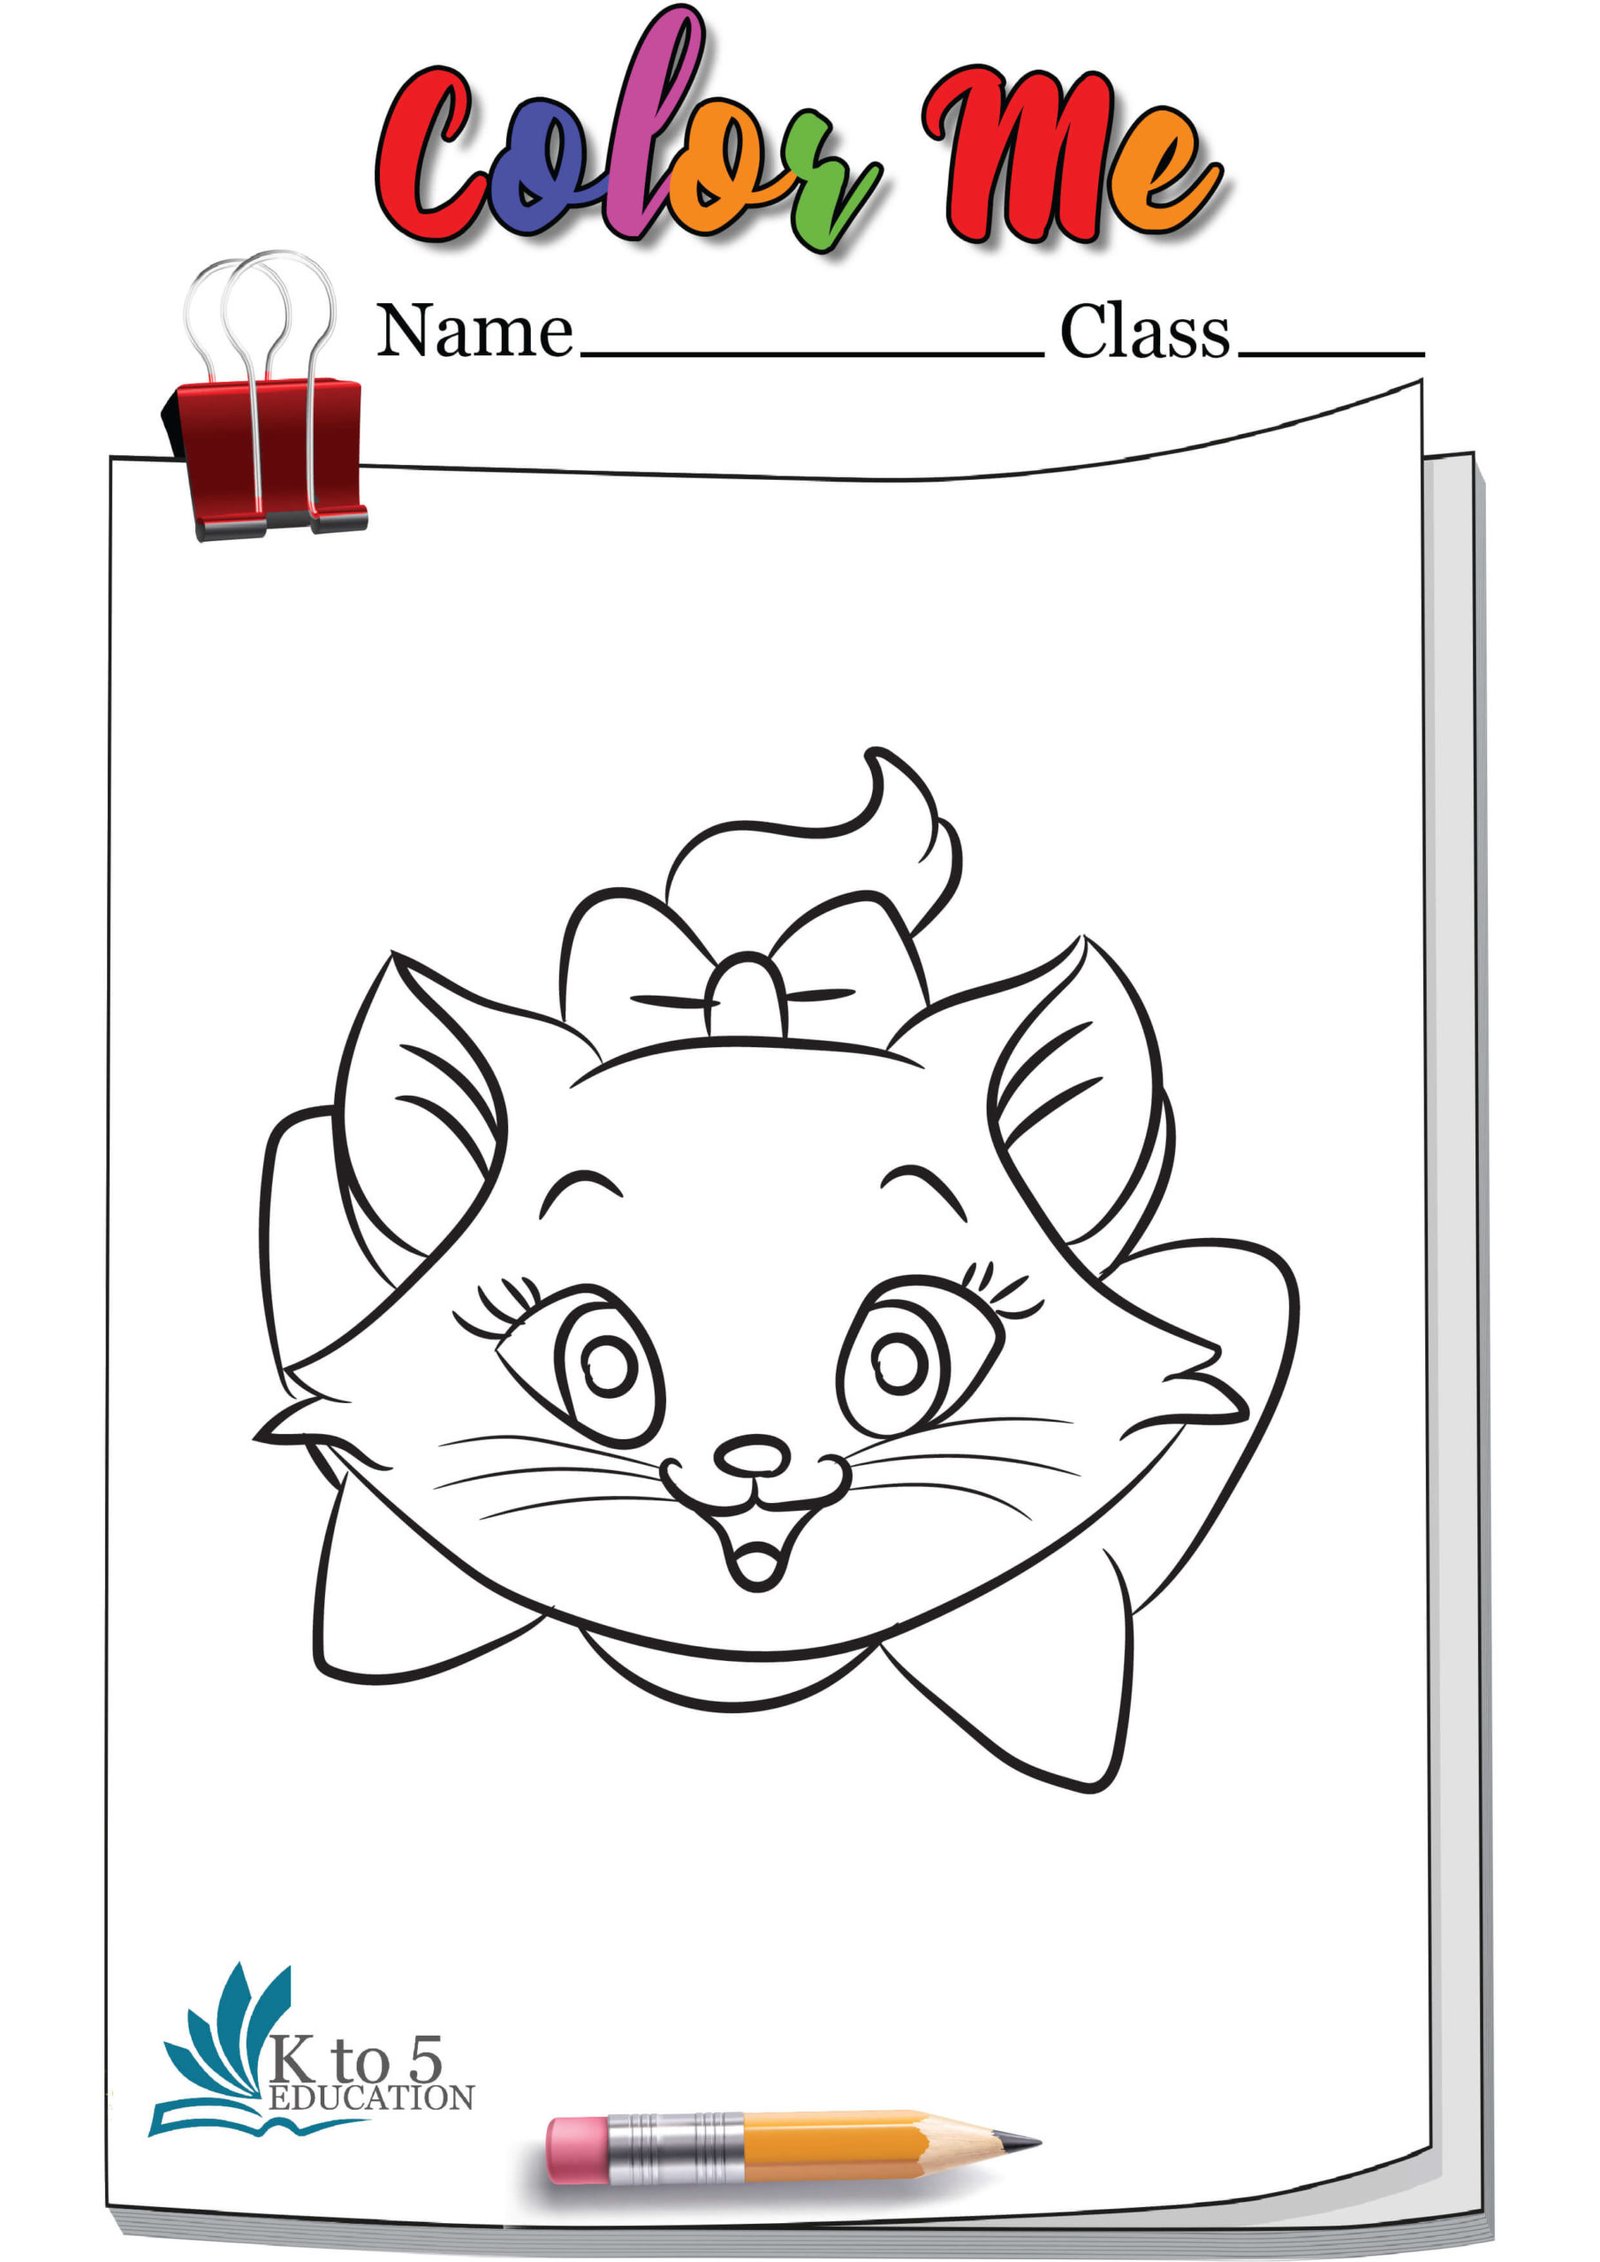 Cat smiling head coloring page worksheet